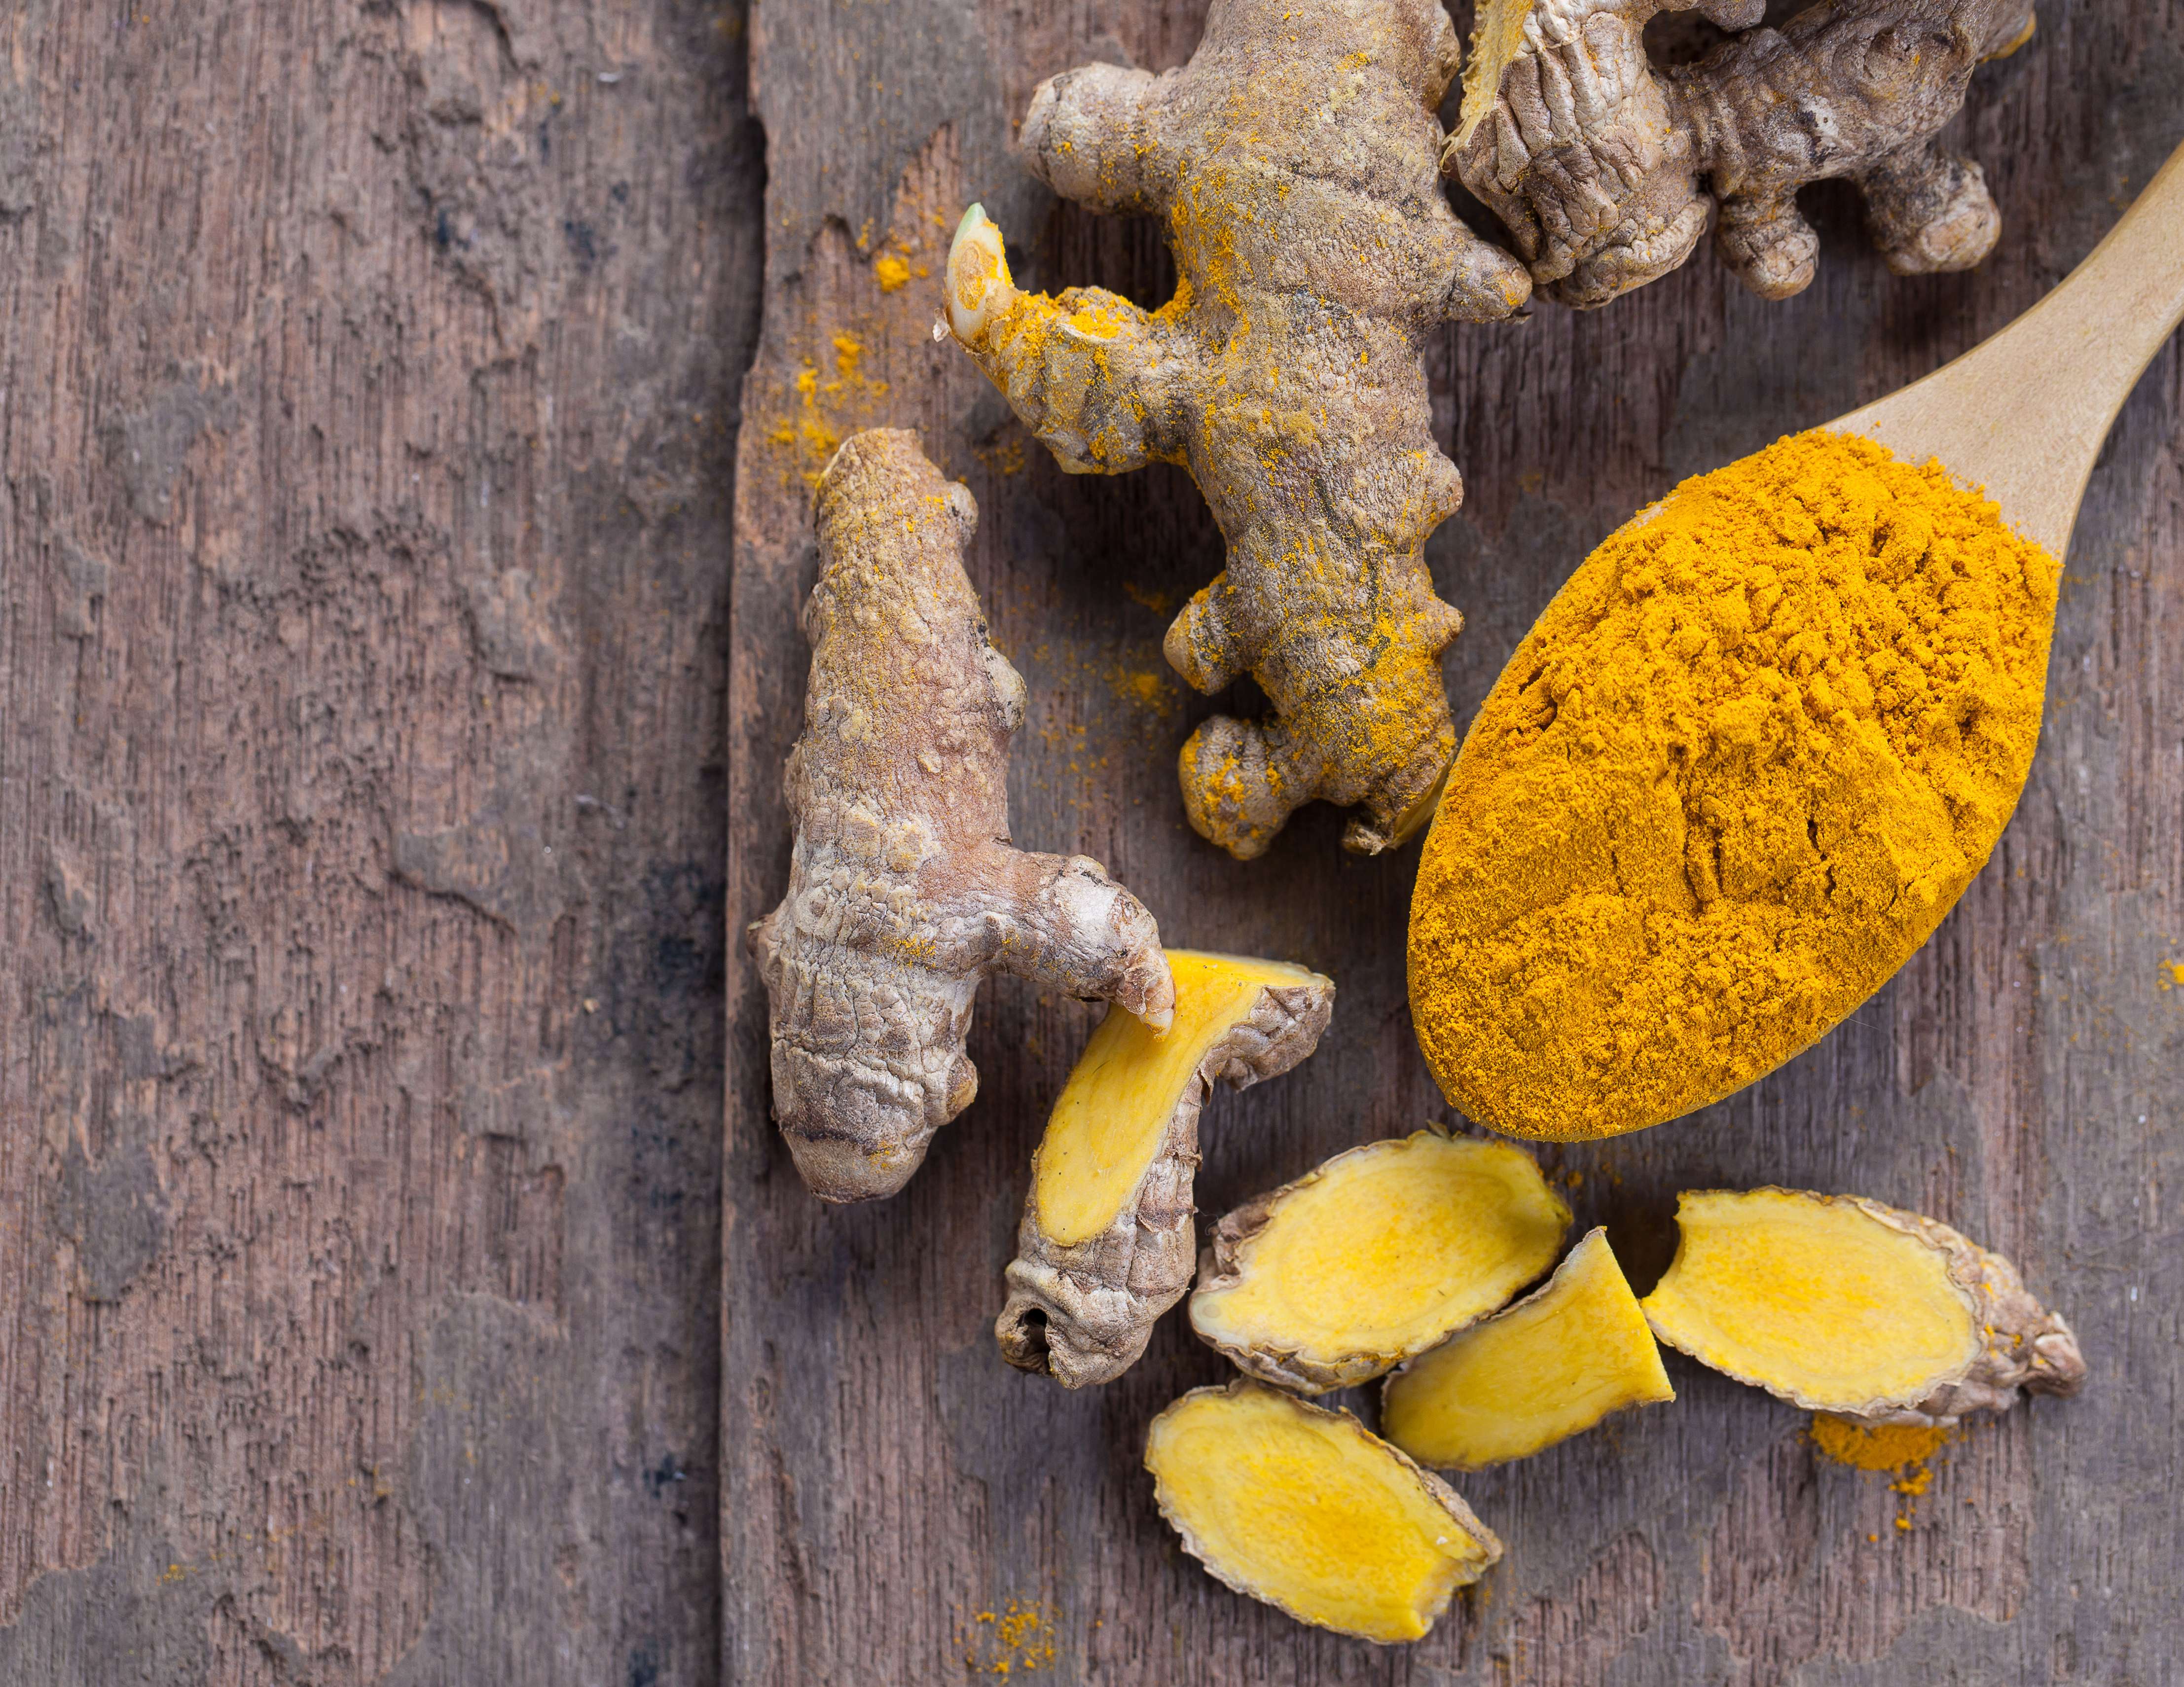 The yellow root from South Asia is a well known ingredient in curries and Middle Eastern dishes and has a large number of health benefits